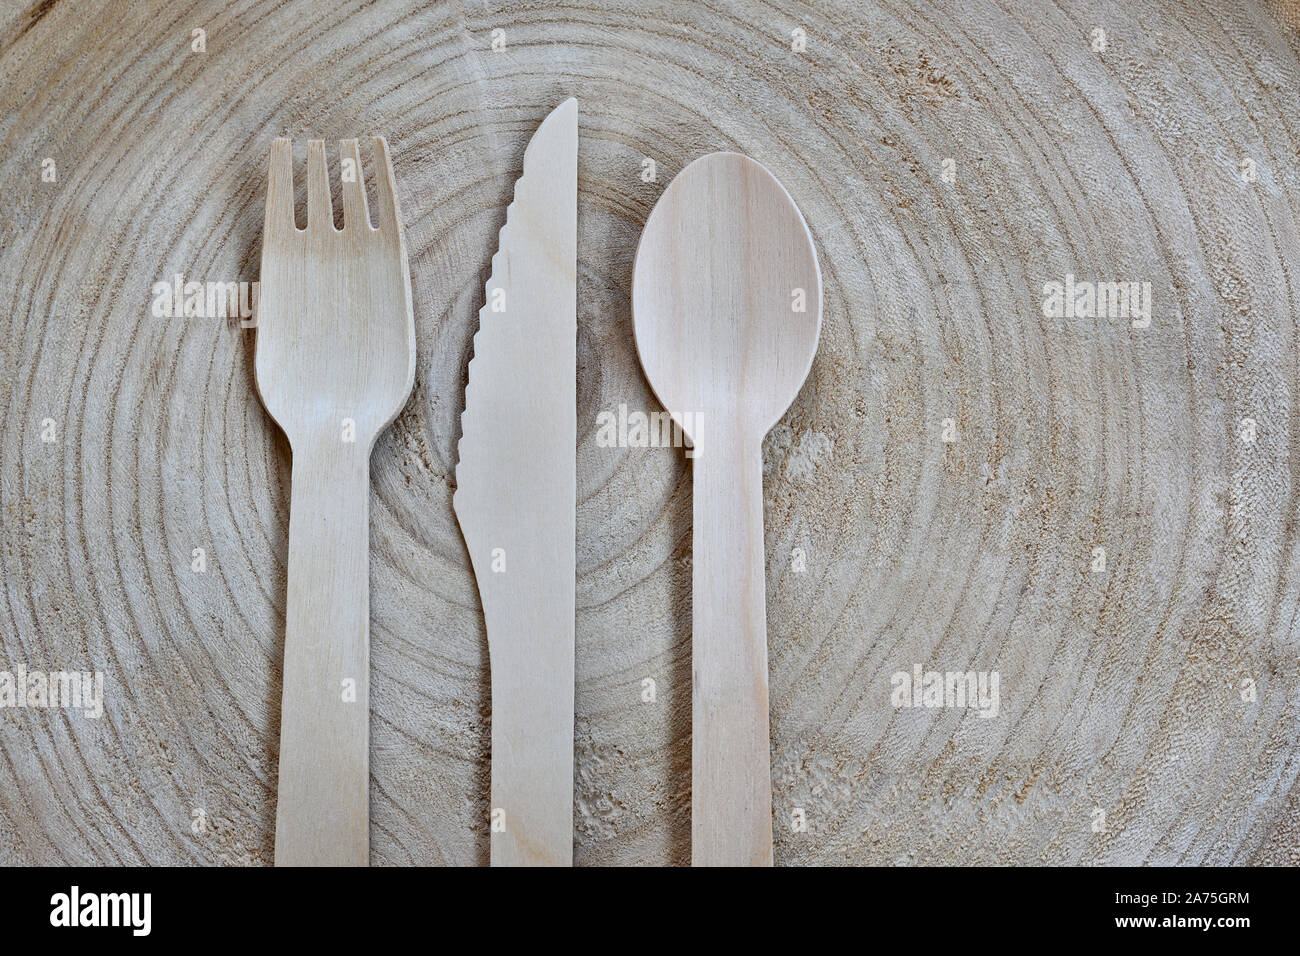 Plastic-free, disposable cutlery made of wood. Wooden fork, knife and spoon on a tree slice. Pro environmental concept, copy space for text and design Stock Photo